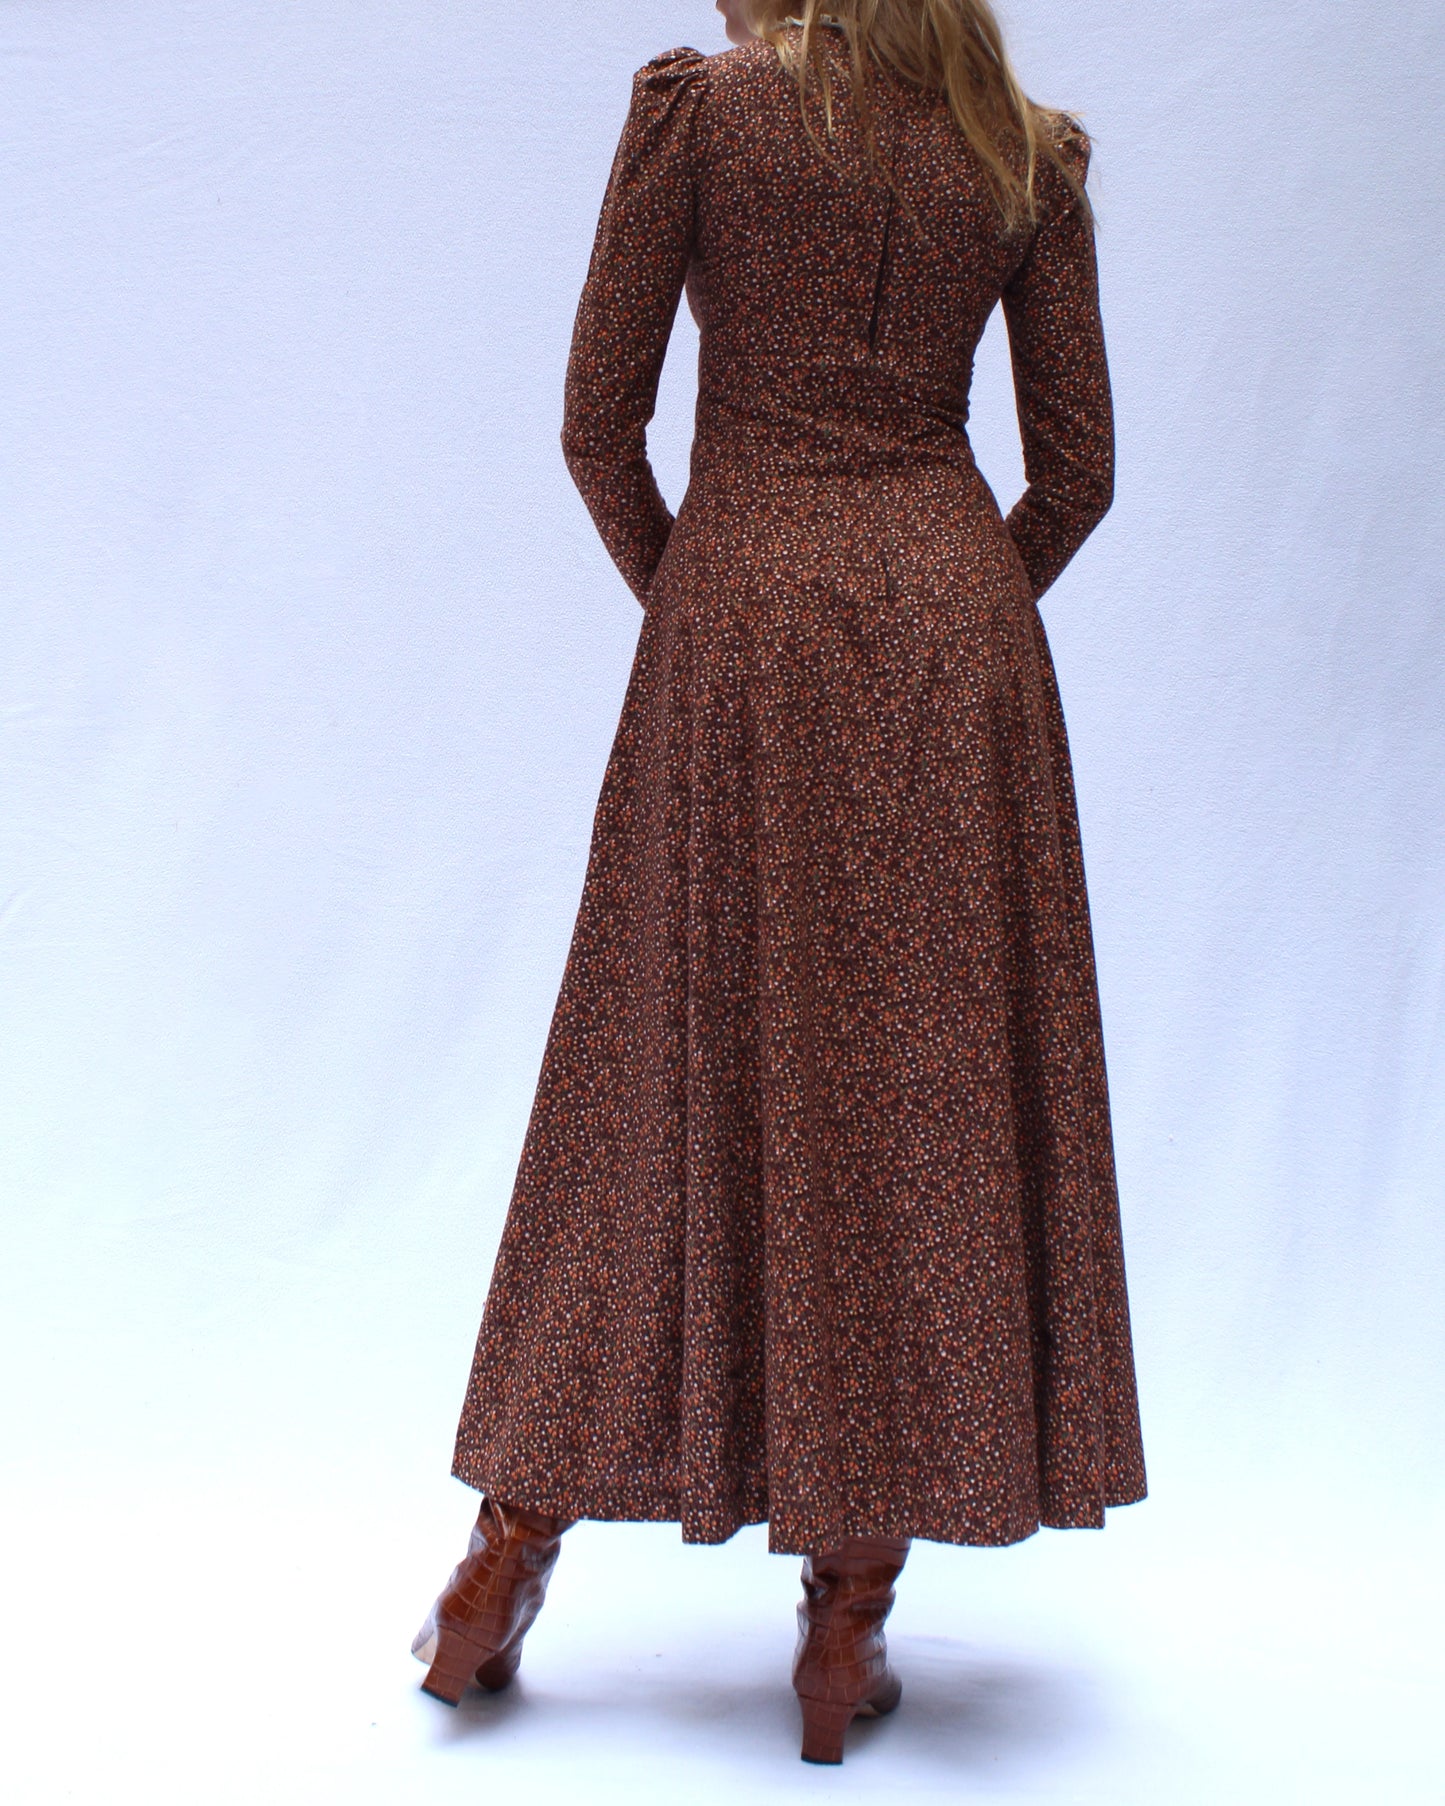 1970s VICTORIAN STYLE CALICO MAXIDRESS, in the style of Gunne Sax